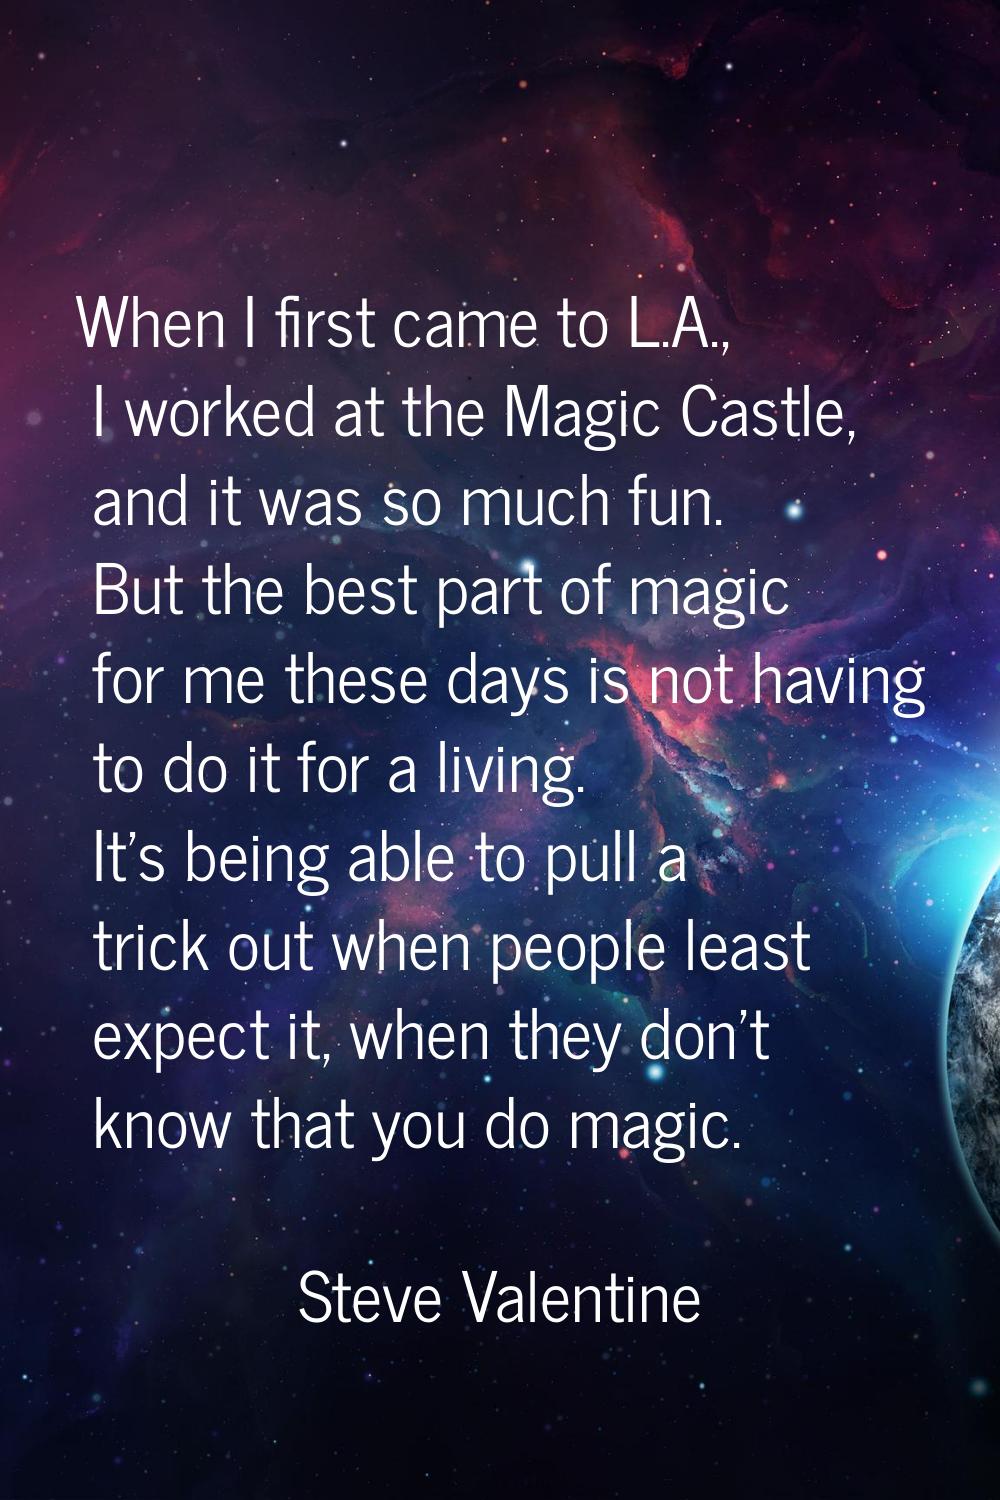 When I first came to L.A., I worked at the Magic Castle, and it was so much fun. But the best part 